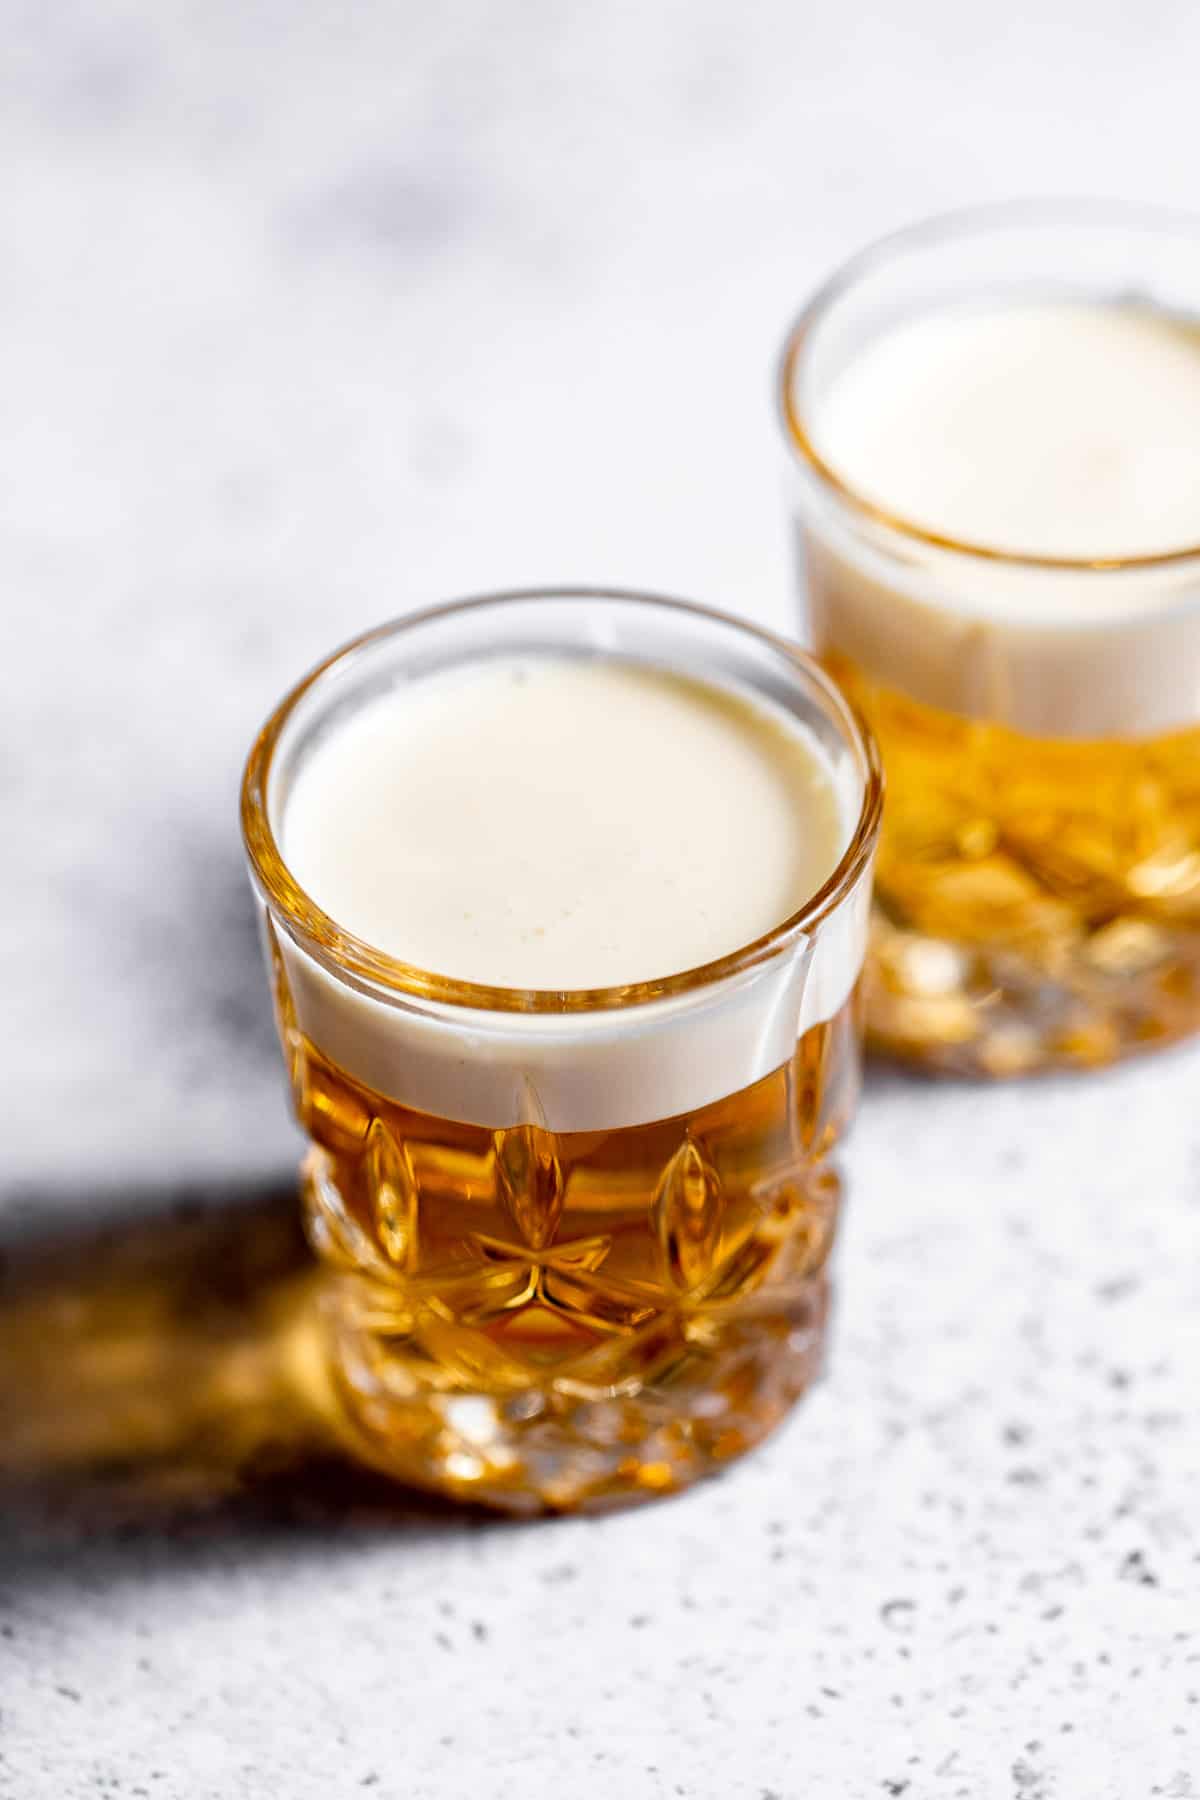 Two layered Mini Beer Shots on marble background with heavy cream topping.